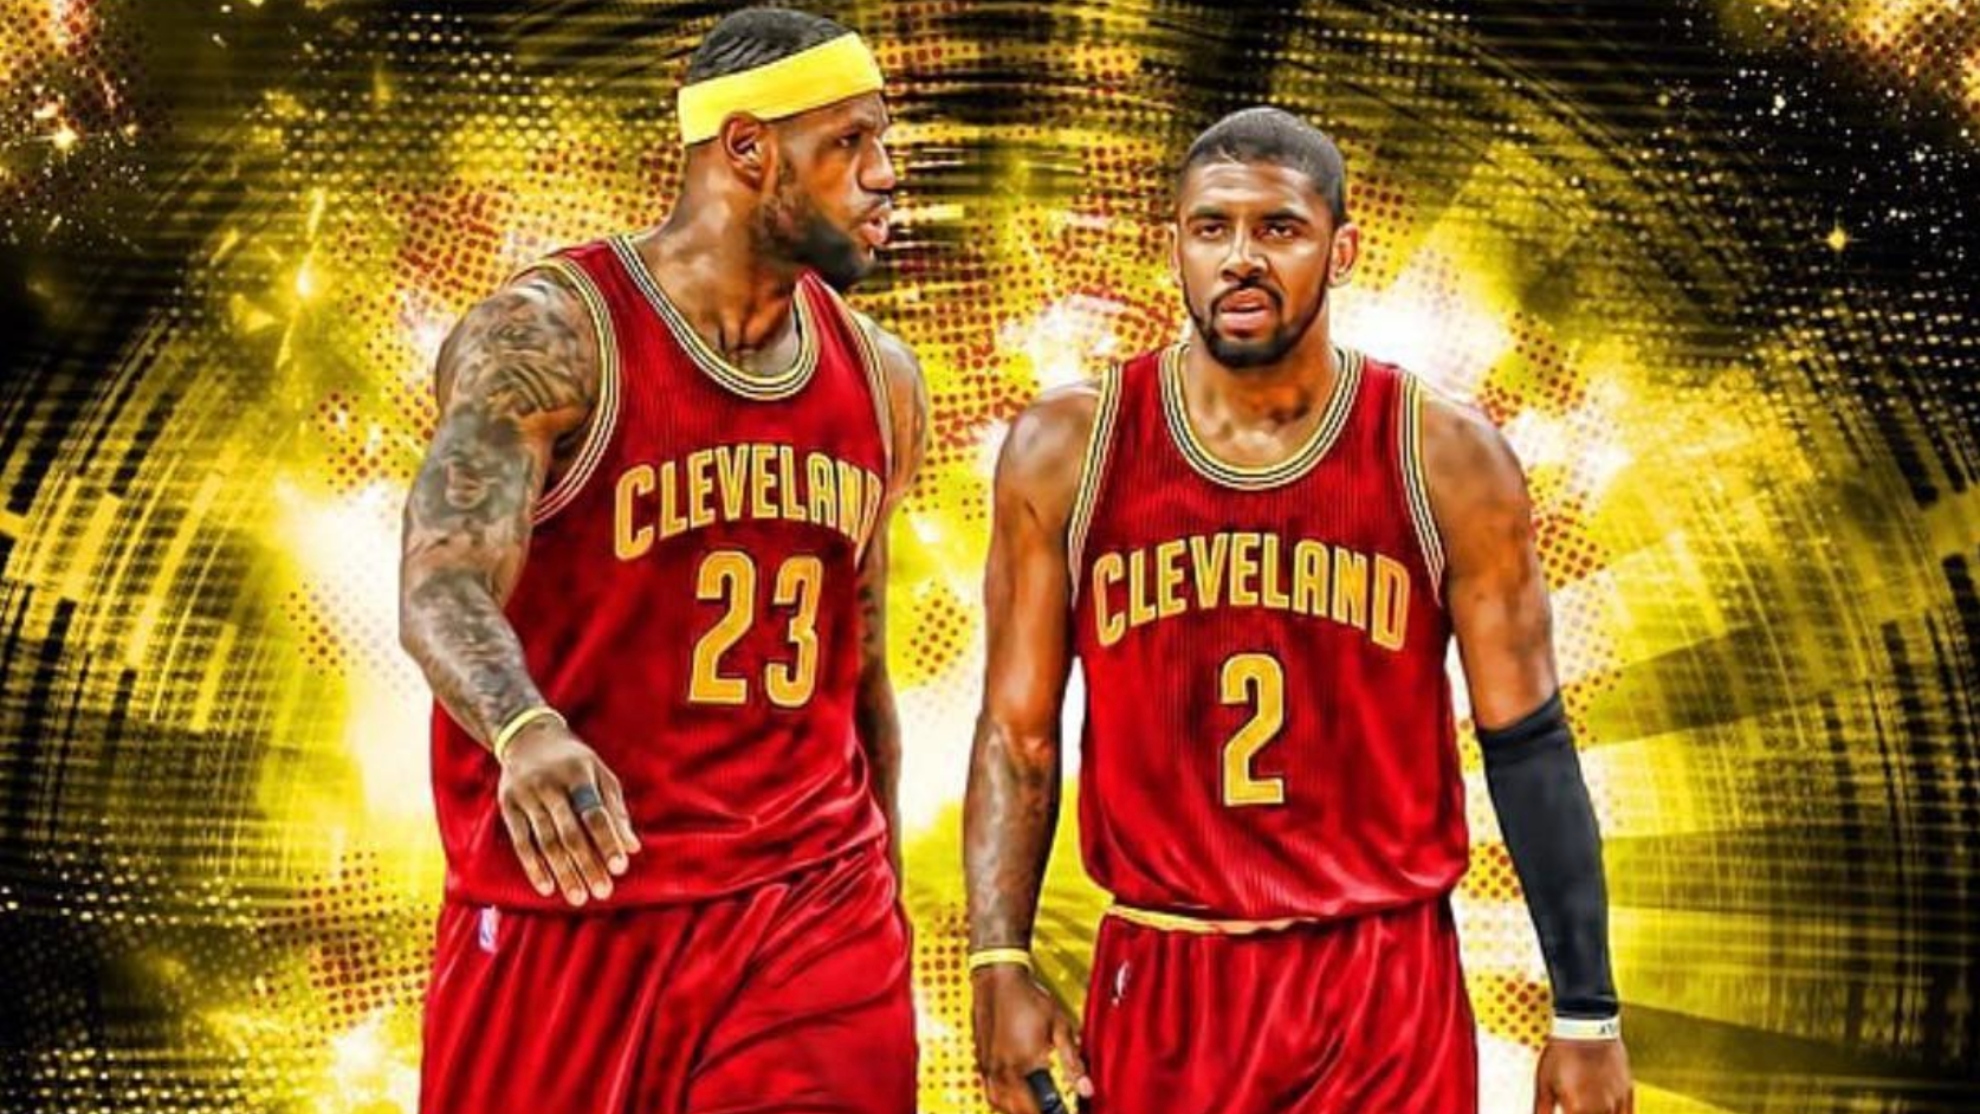 LeBron James and Kyrie Irving - Cleveland Cavaliers